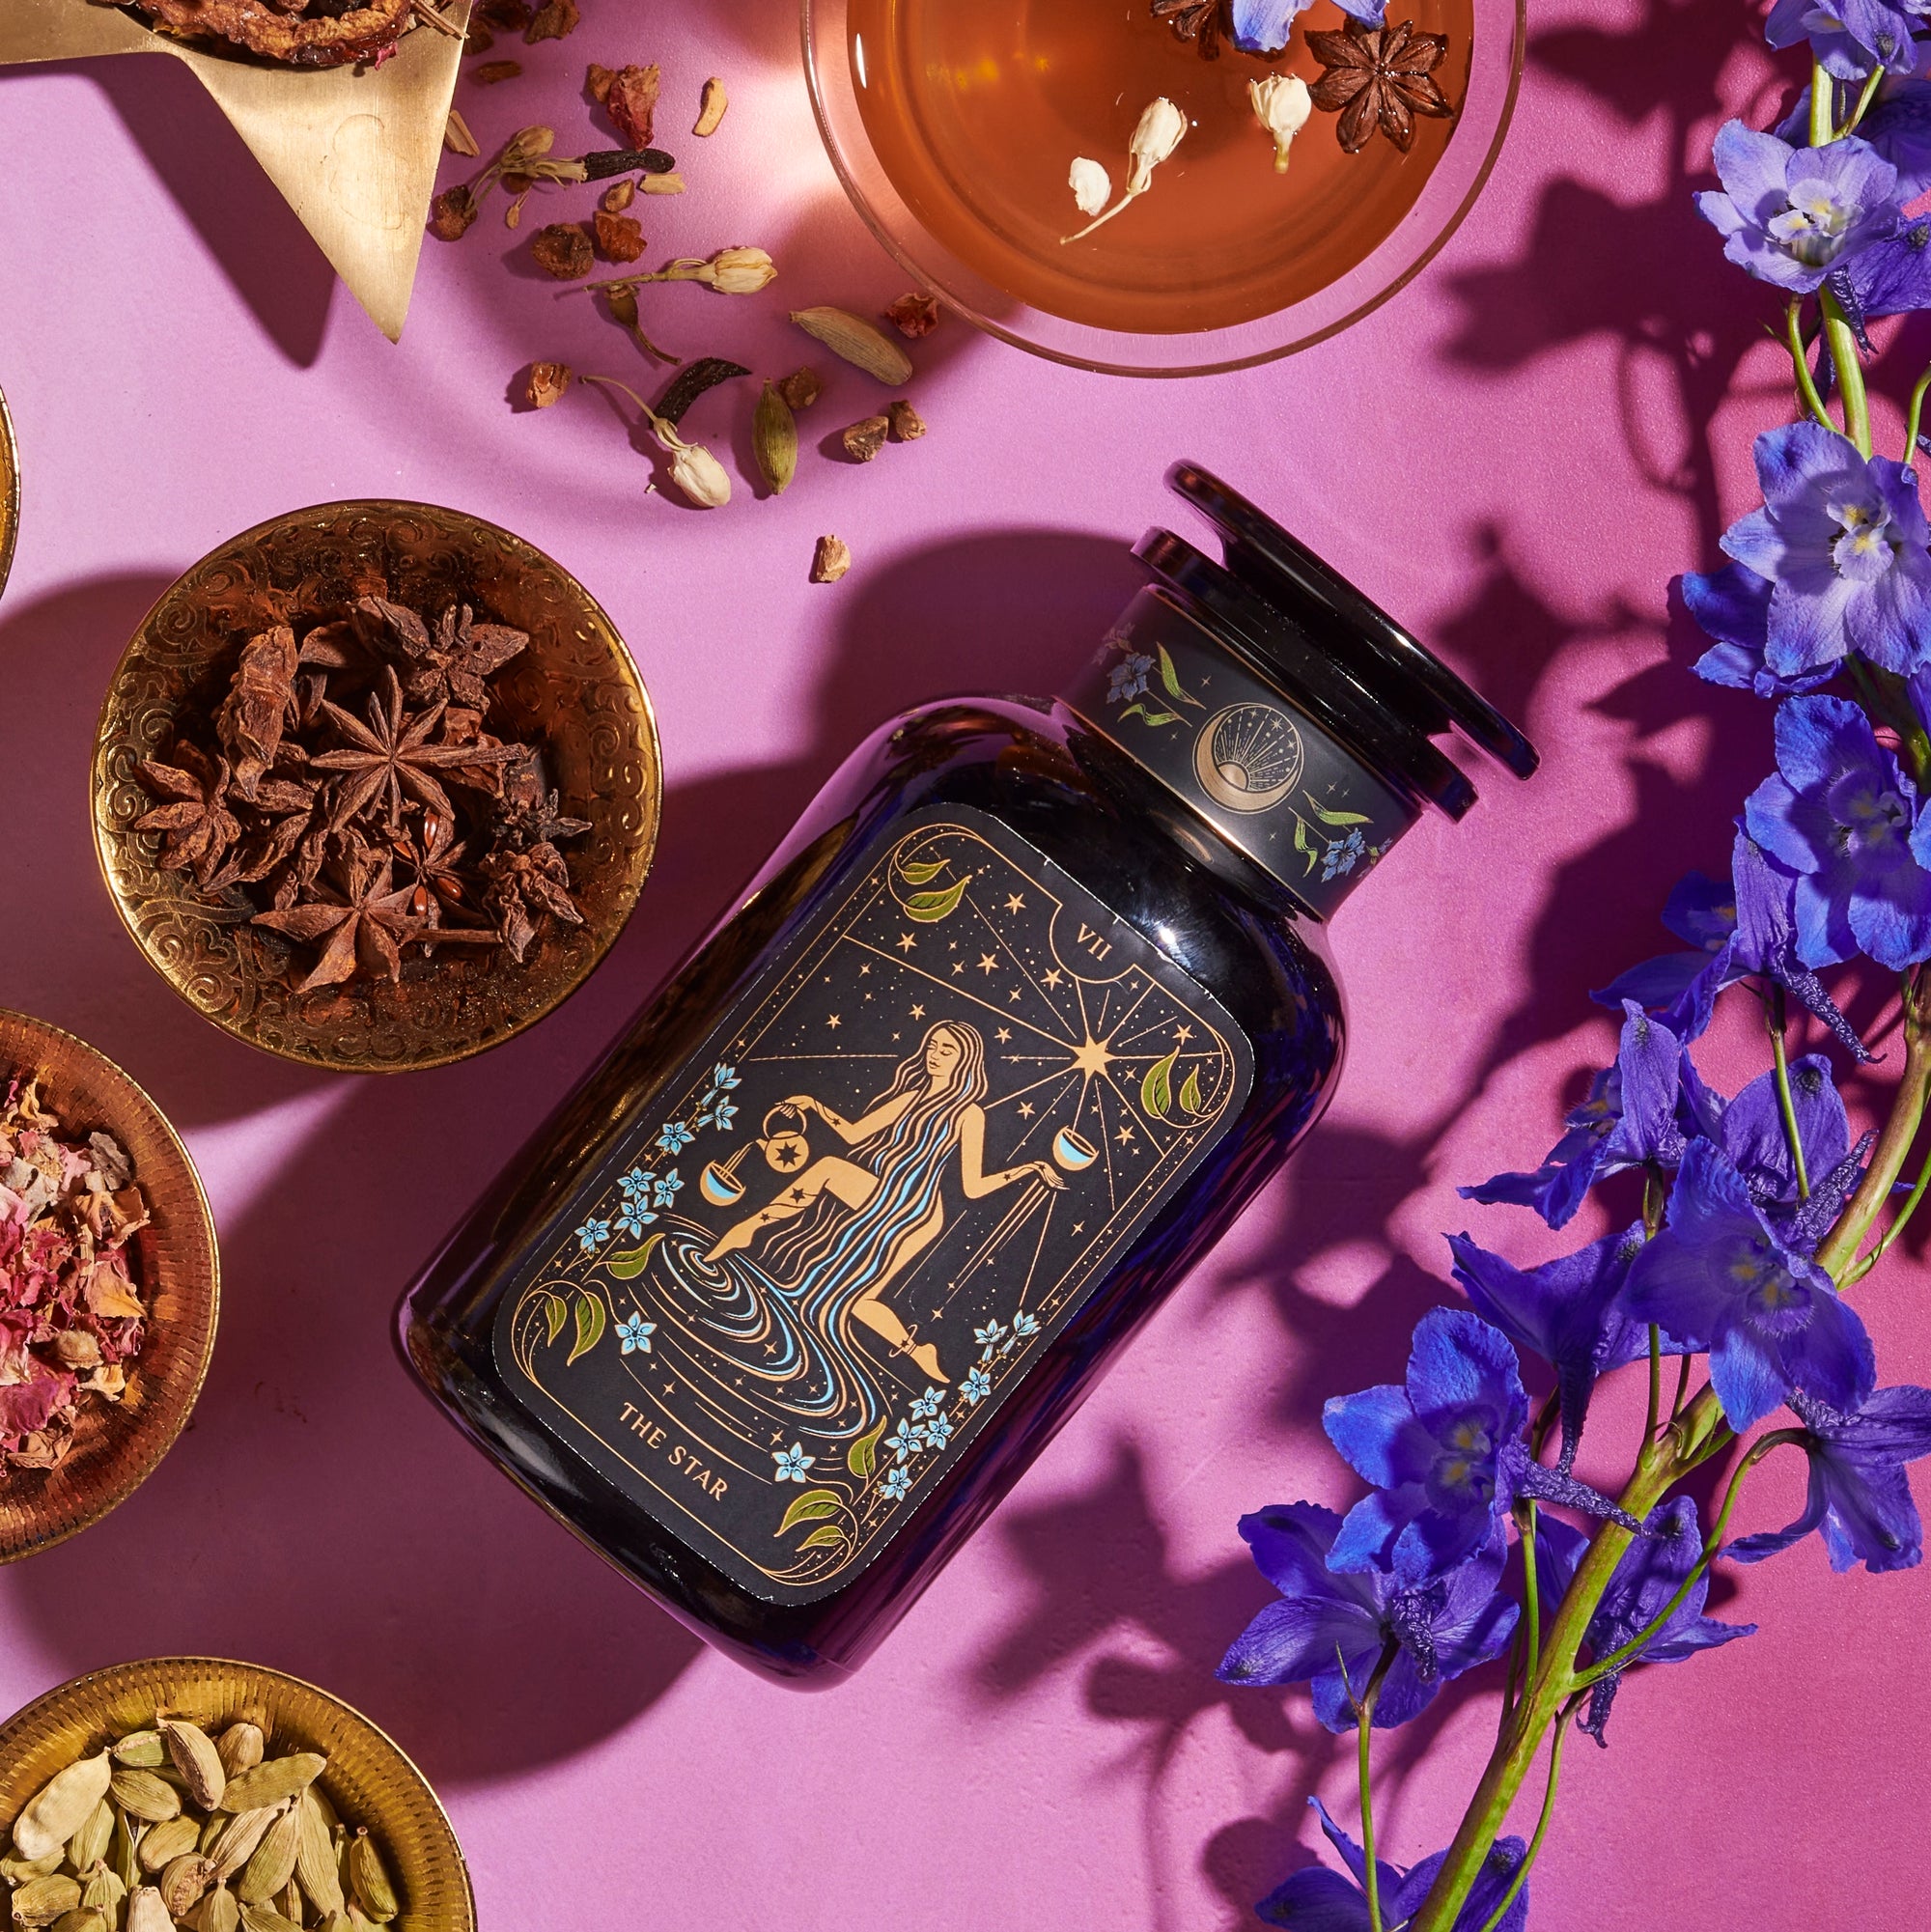 A dark bottle with a label featuring "The Star" tarot card design lays on a pink surface surrounded by various dried herbs in small bowls, a cup of Magic Hour tea, and purple blue flowers. The setup has a mystical and herbalist theme and showcases the Magic Hour product The Star: Vanilla-Ginger Beauty Potion with Jasmine & Shatavari.